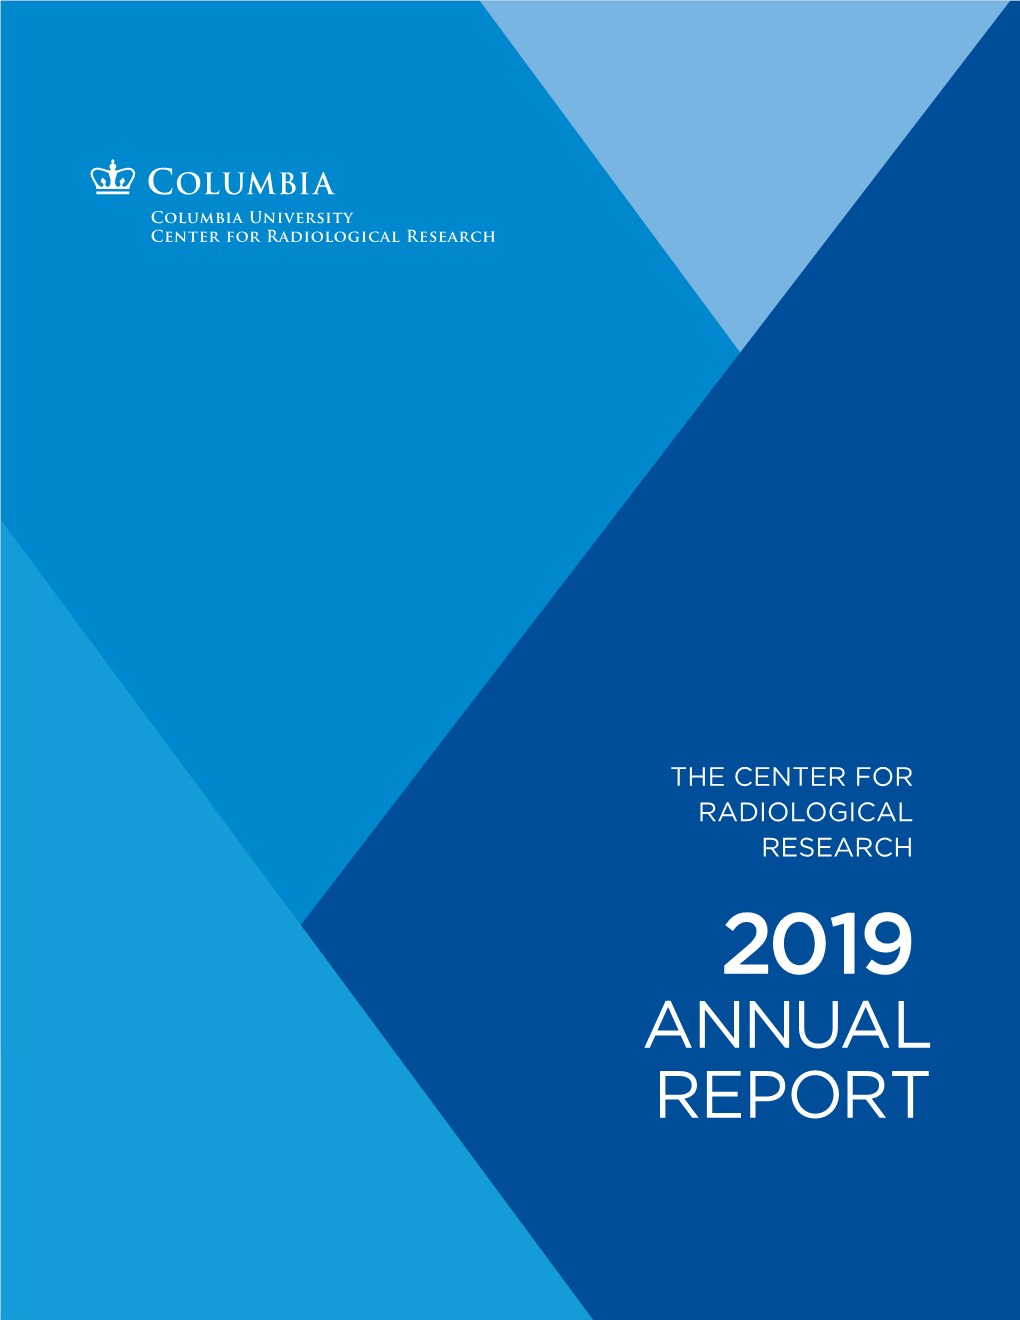 ANNUAL REPORT CRR 2018 FACULTY and RESEARCH STAFF Columbia University Center for Radiological Research